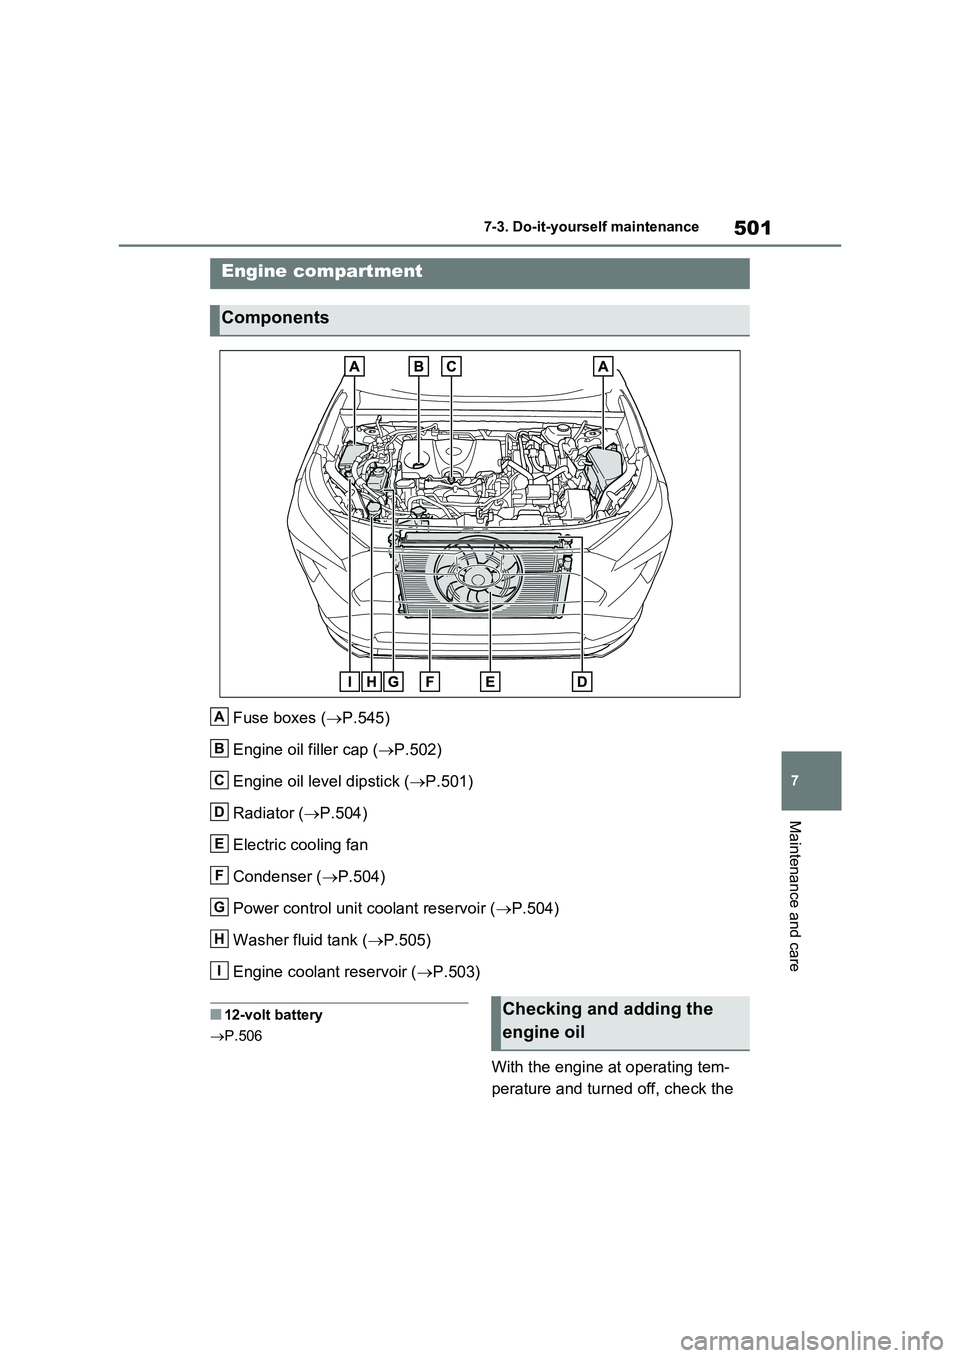 TOYOTA VERSO S 2011  Owners Manual 501
7 7-3. Do-it-yourself maintenance
Maintenance and care
Fuse boxes (P.545)
Engine oil filler cap (P.502)
Engine oil level dipstick (P.501)
Radiator (P.504)
Electric cooling fan
Condense